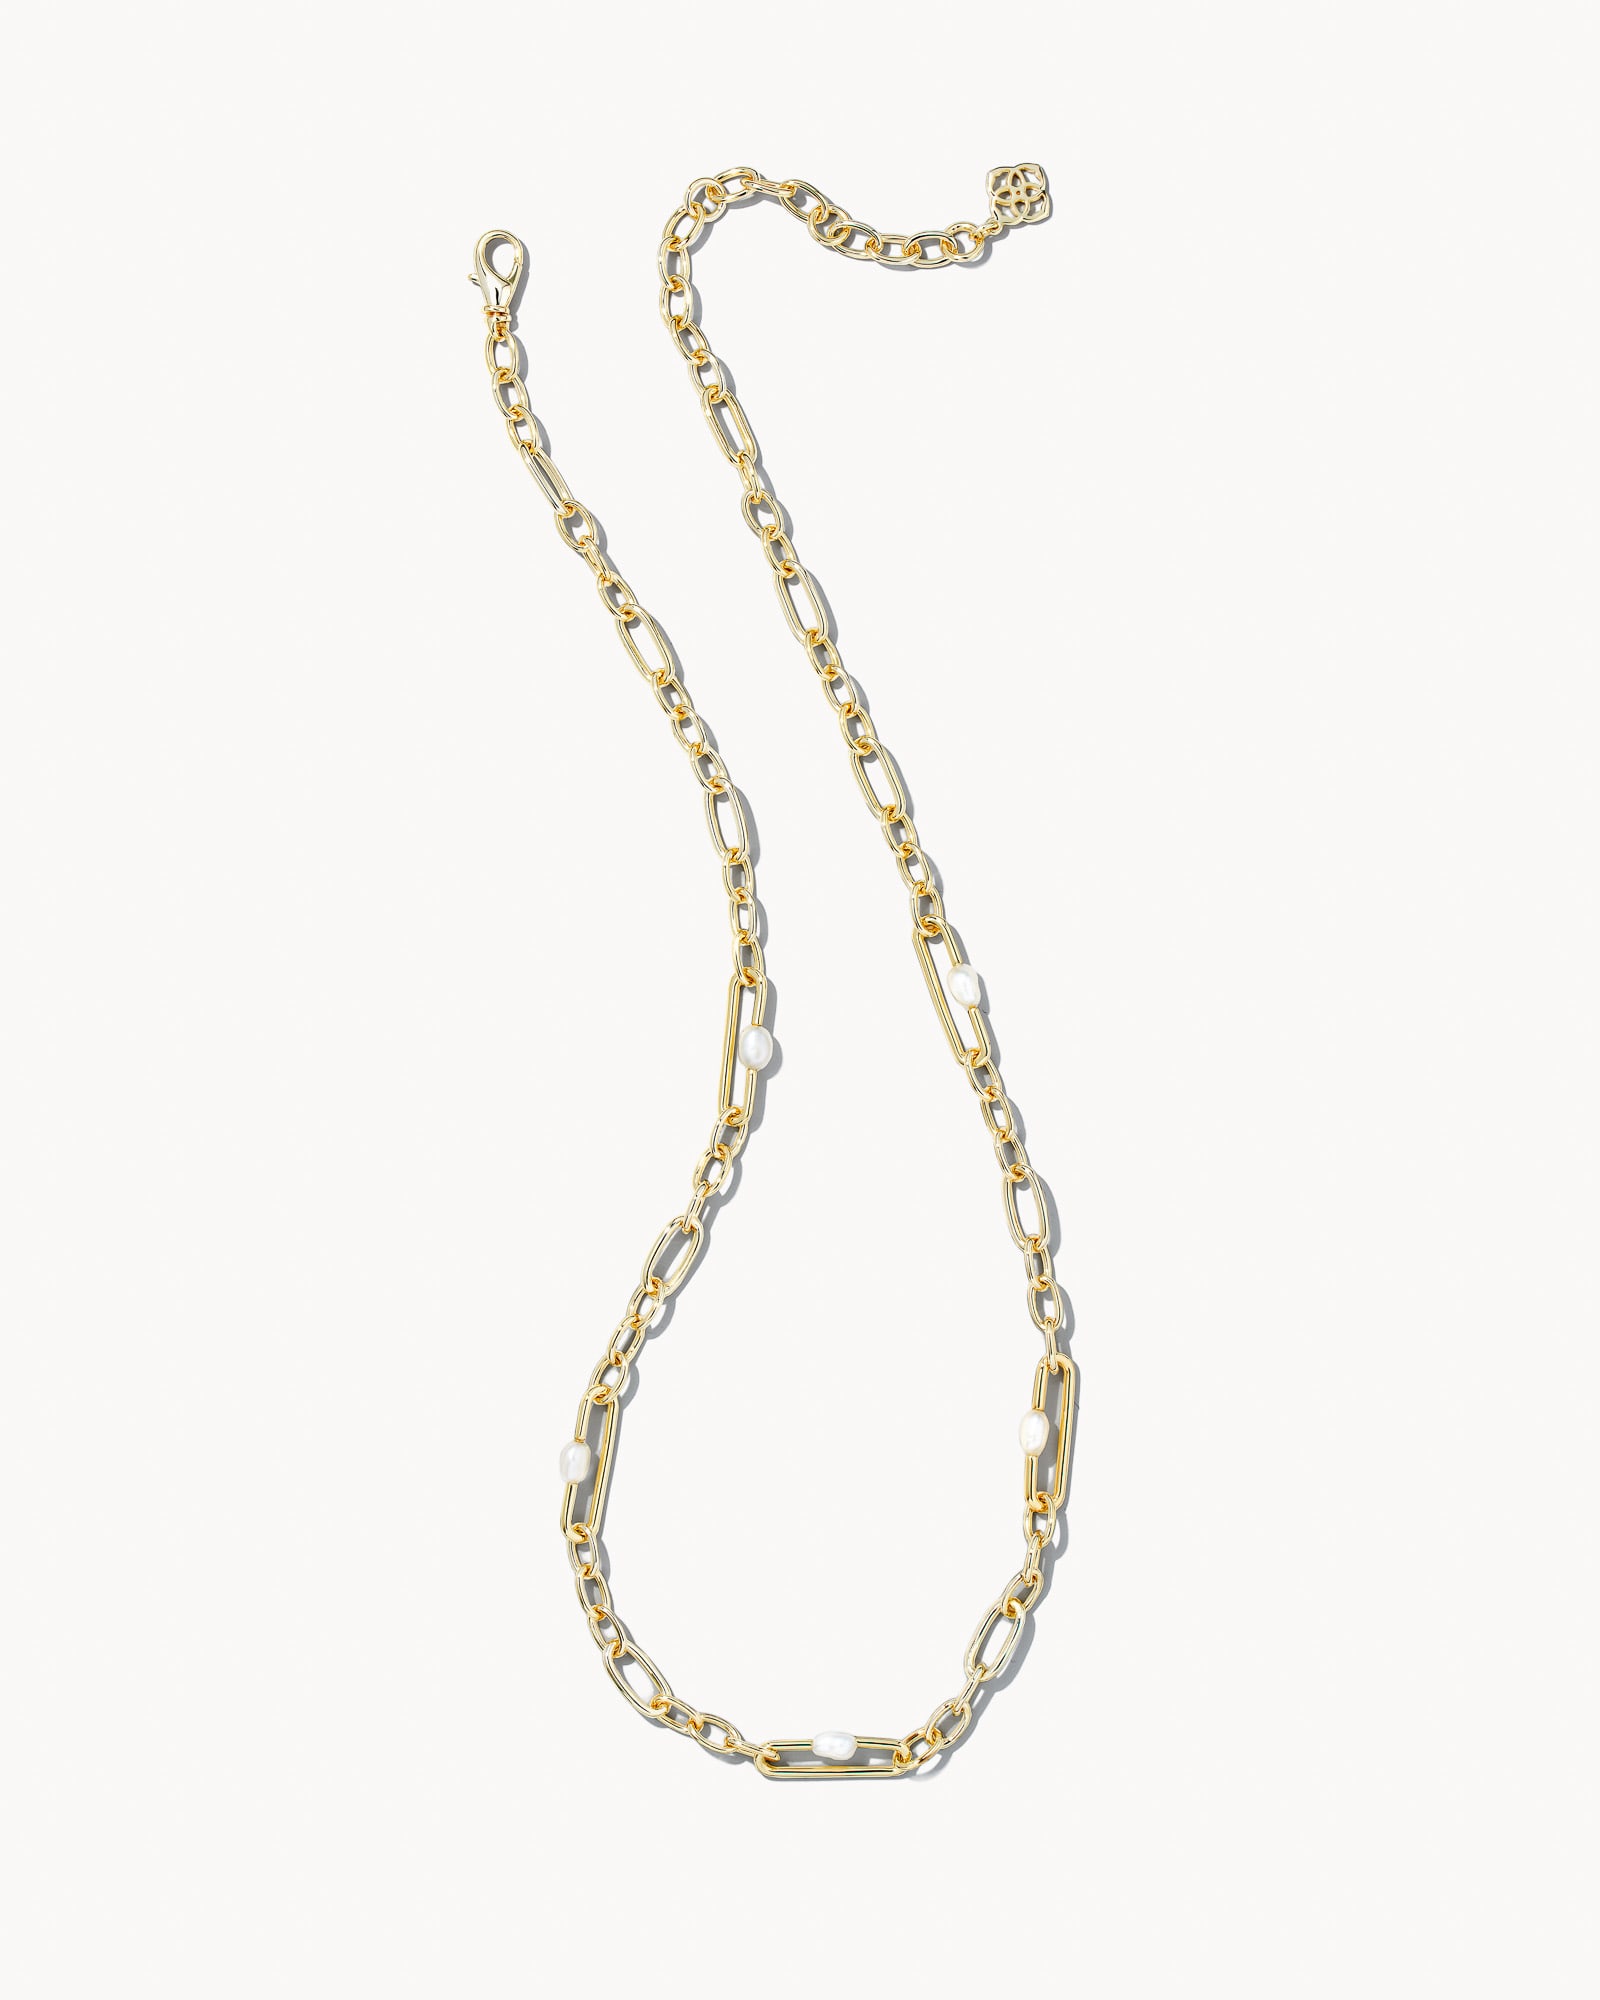 Lindsay Gold Chain Necklace in White Pearl